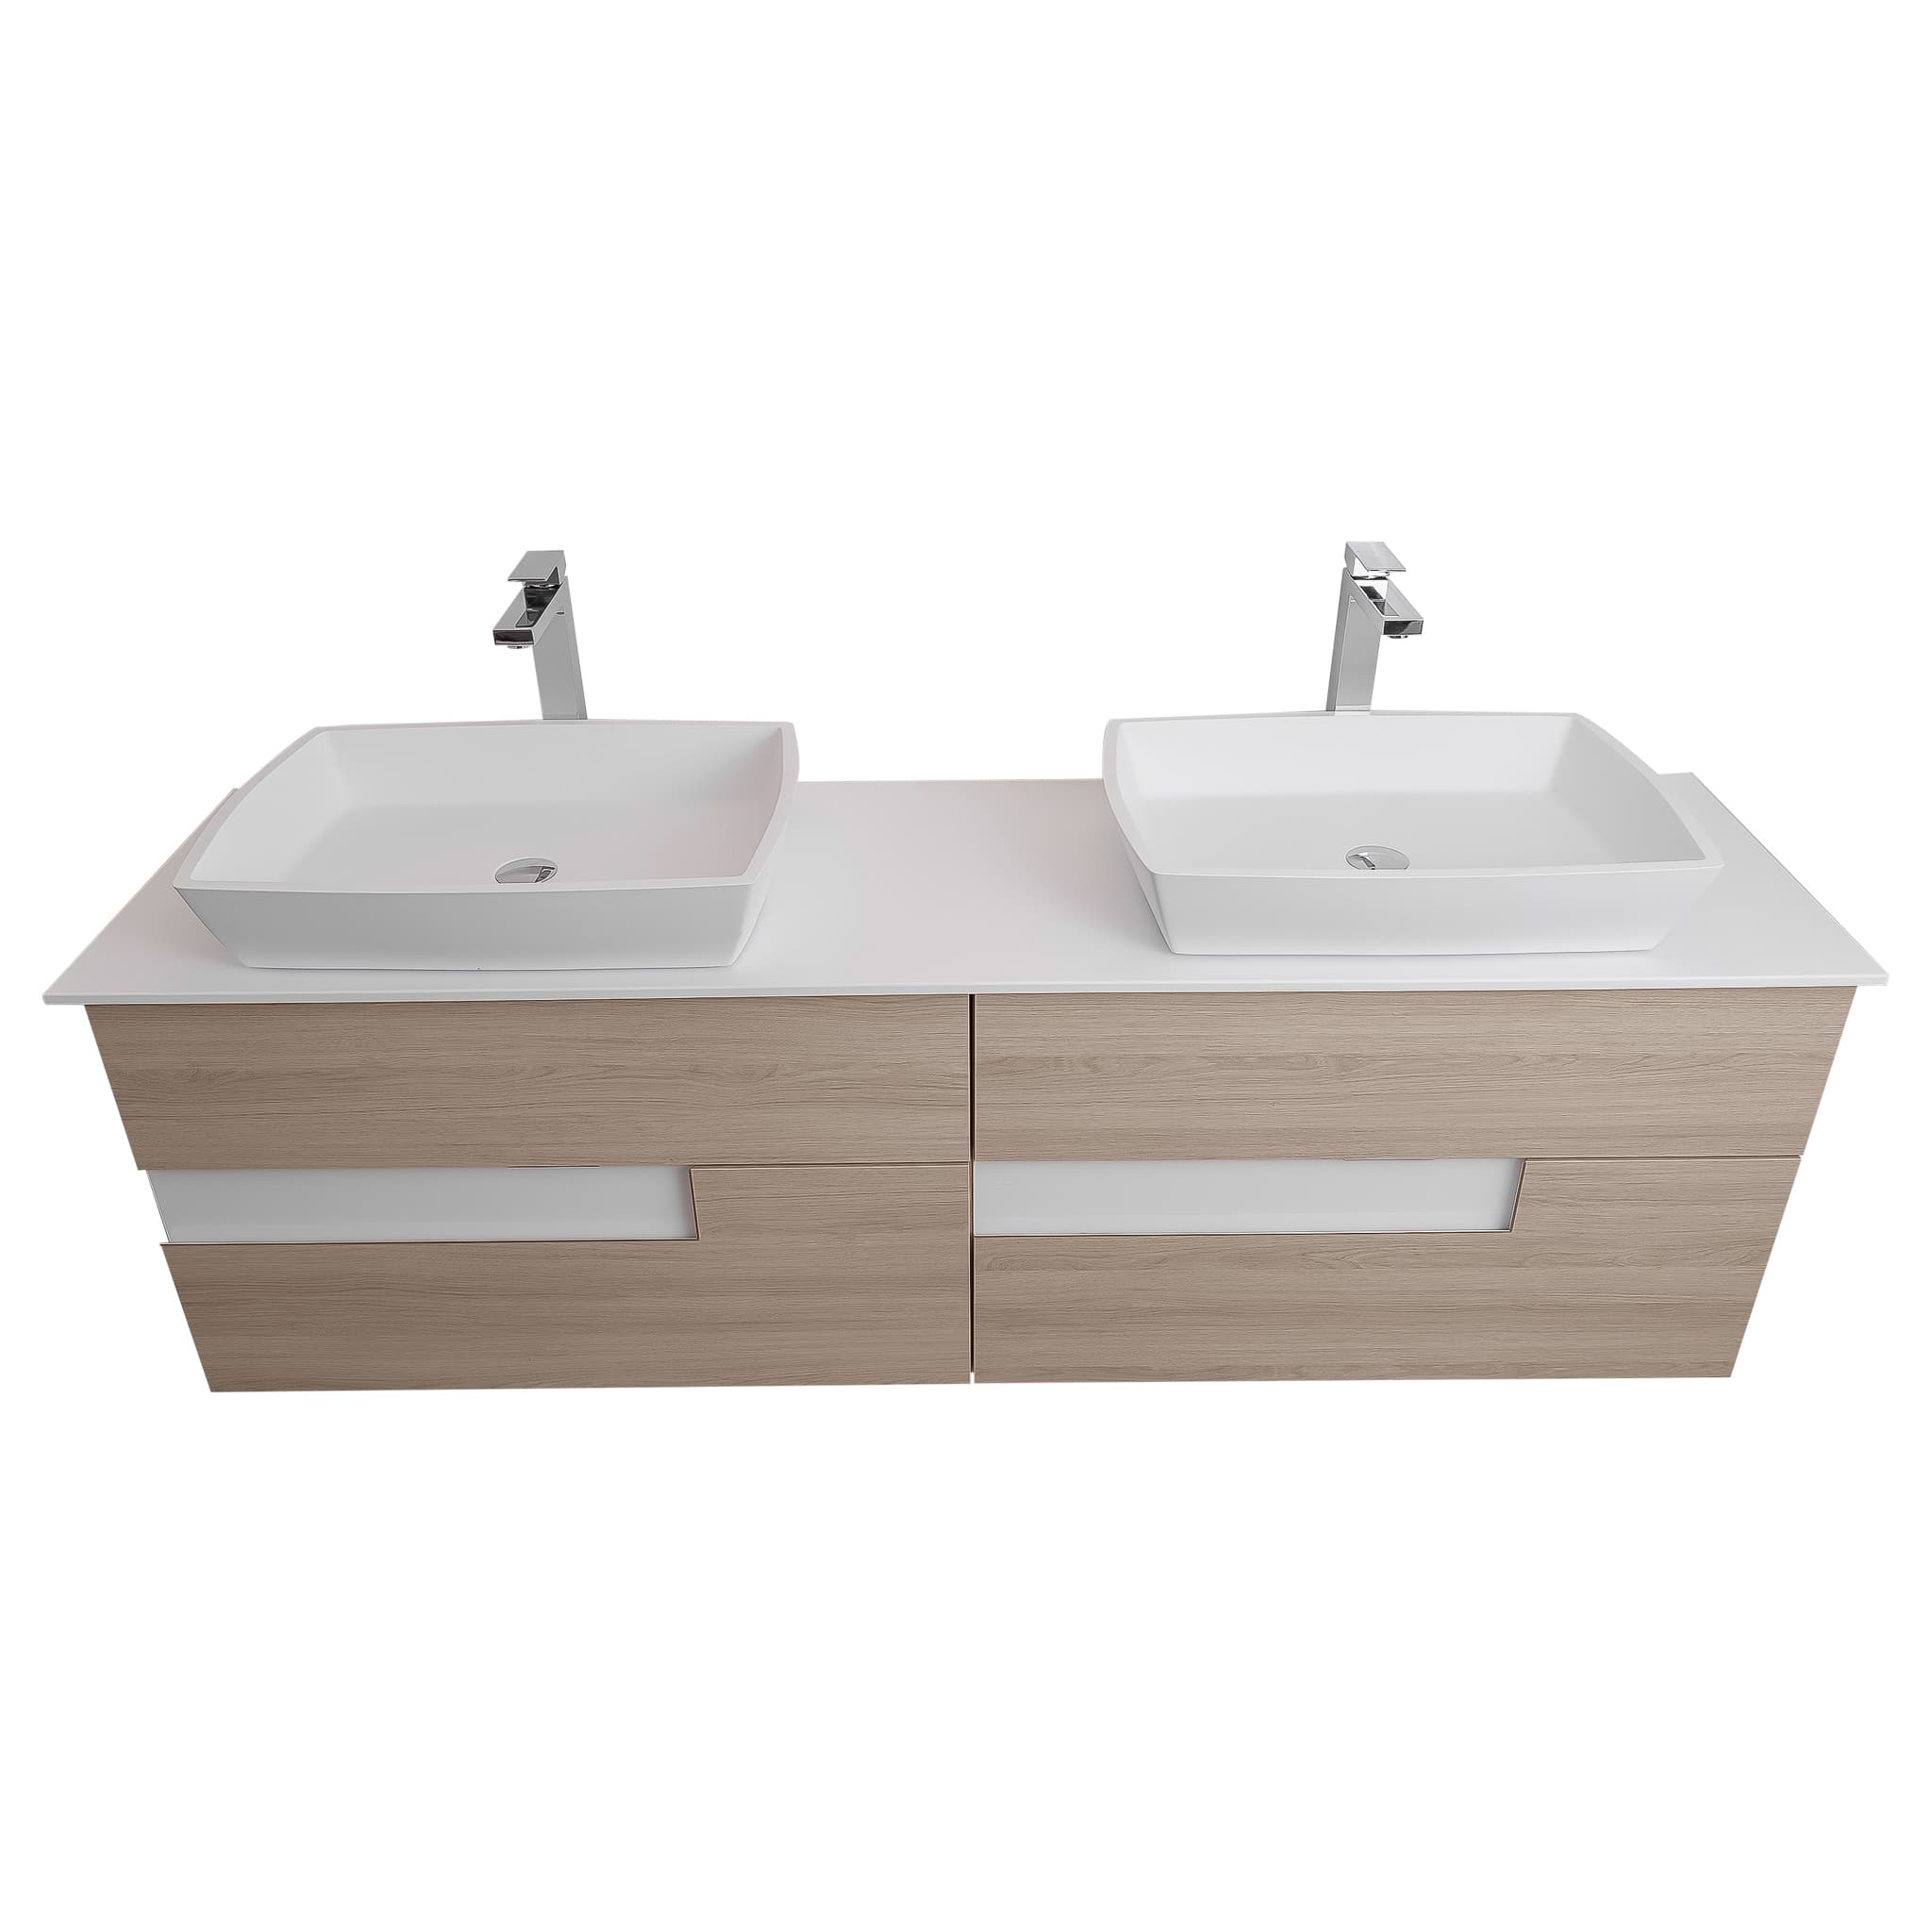 Vision 72 Natural Light Wood Cabinet, Solid Surface Flat White Counter And Two Square Solid Surface White Basin 1316, Wall Mounted Modern Vanity Set